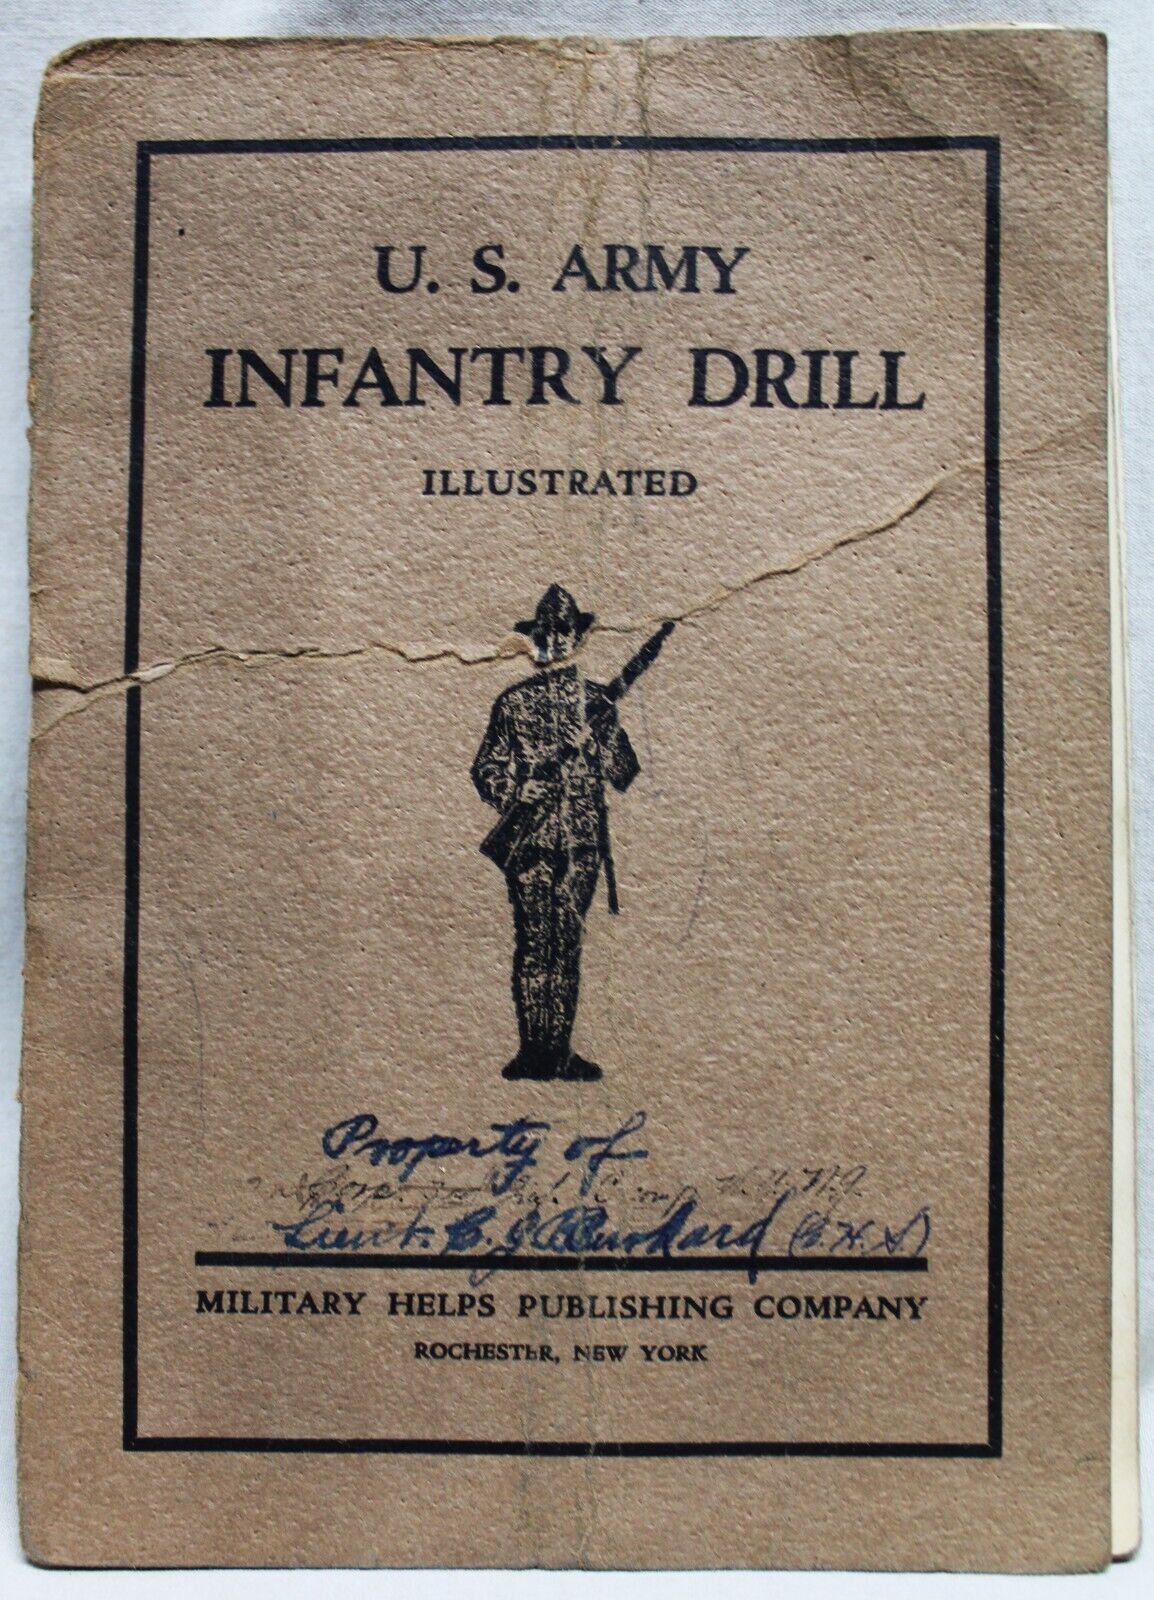 U.S. ARMY INFANTRY DRILL HANDBOOK 1918 WWI VINTAGE MILITARY - ROCHESTER NY